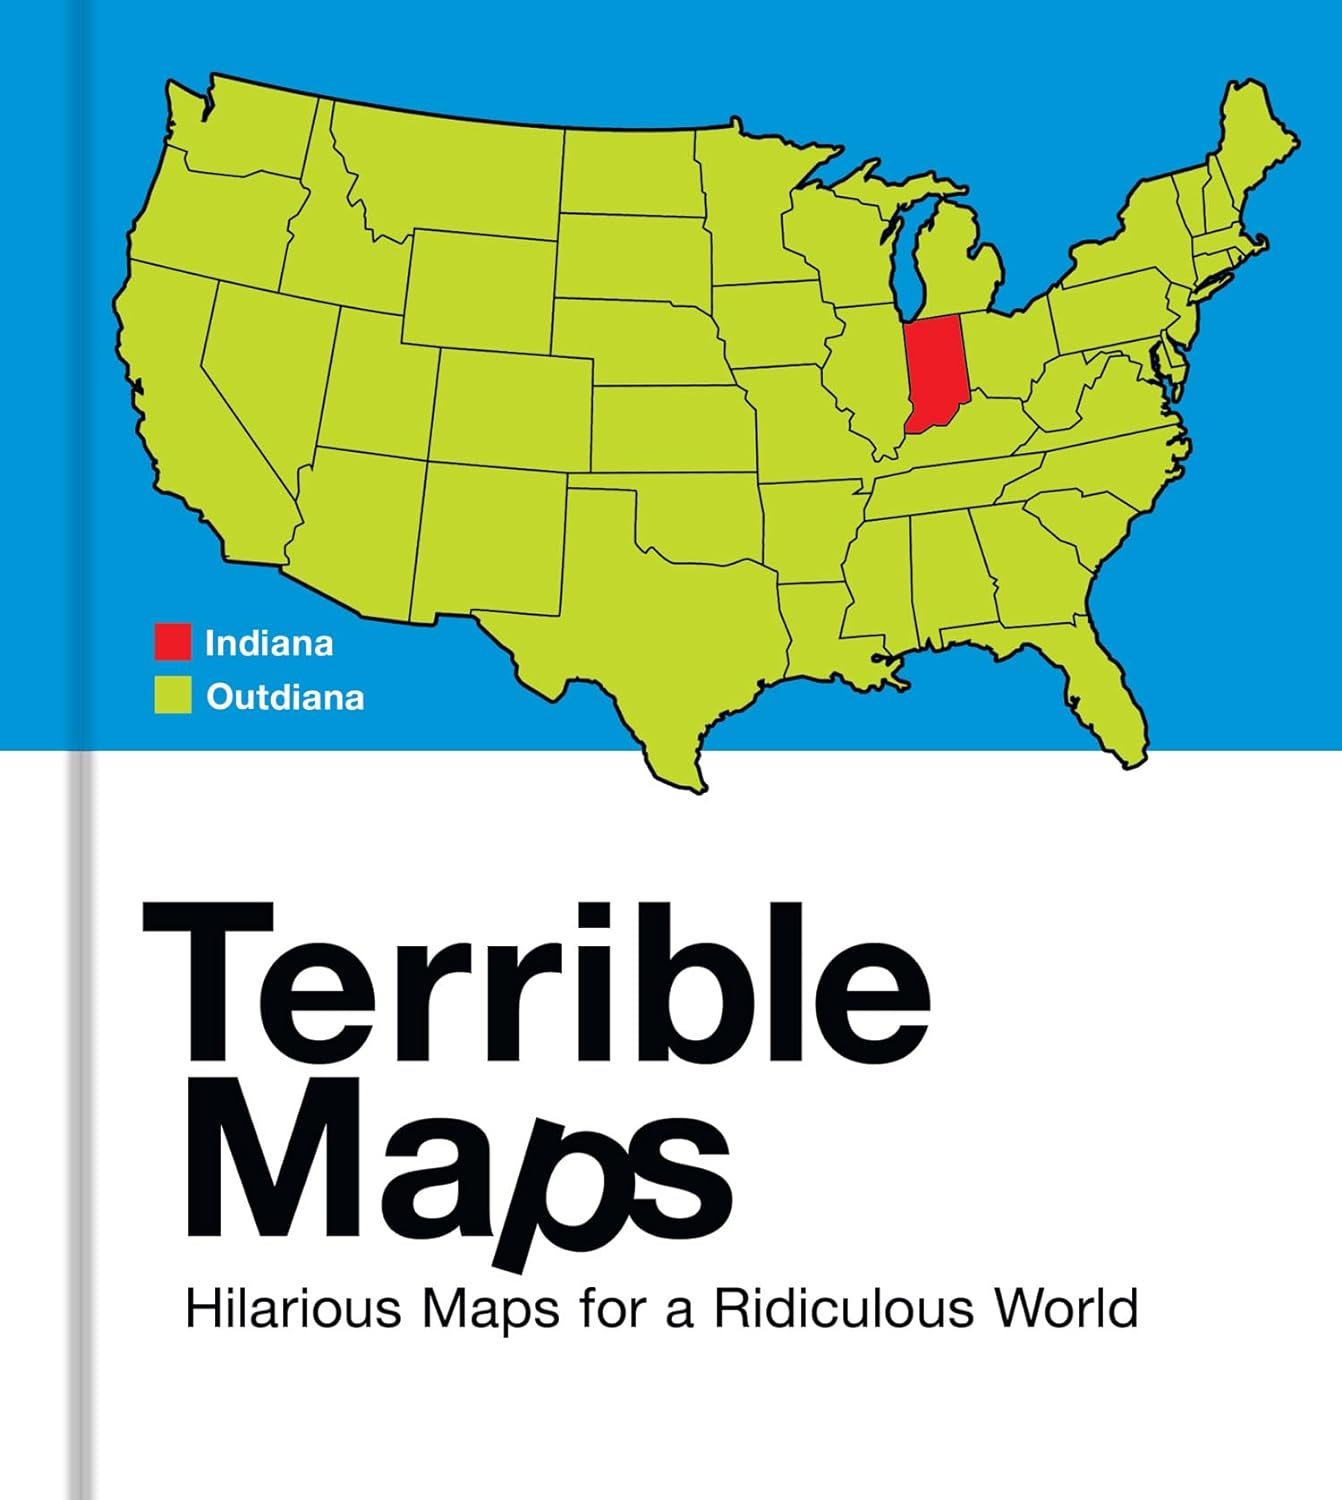 Terrible Maps: Hilarious Maps for a Ridiculous World